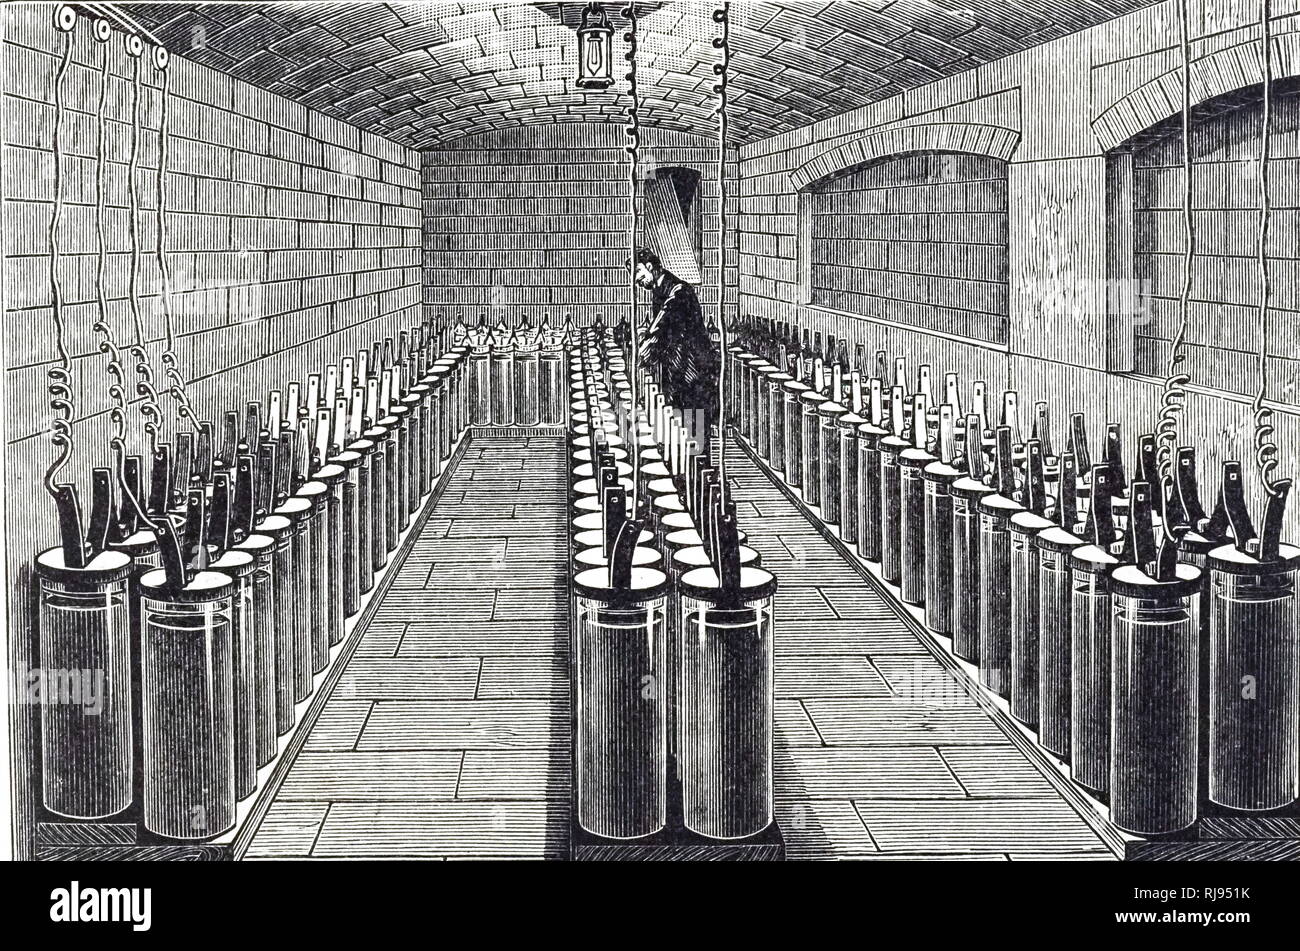 An engraving depicting a battery of 165 Plante cells used to supply light in the Hotel de Ville, Paris, France. Dated 19th century Stock Photo